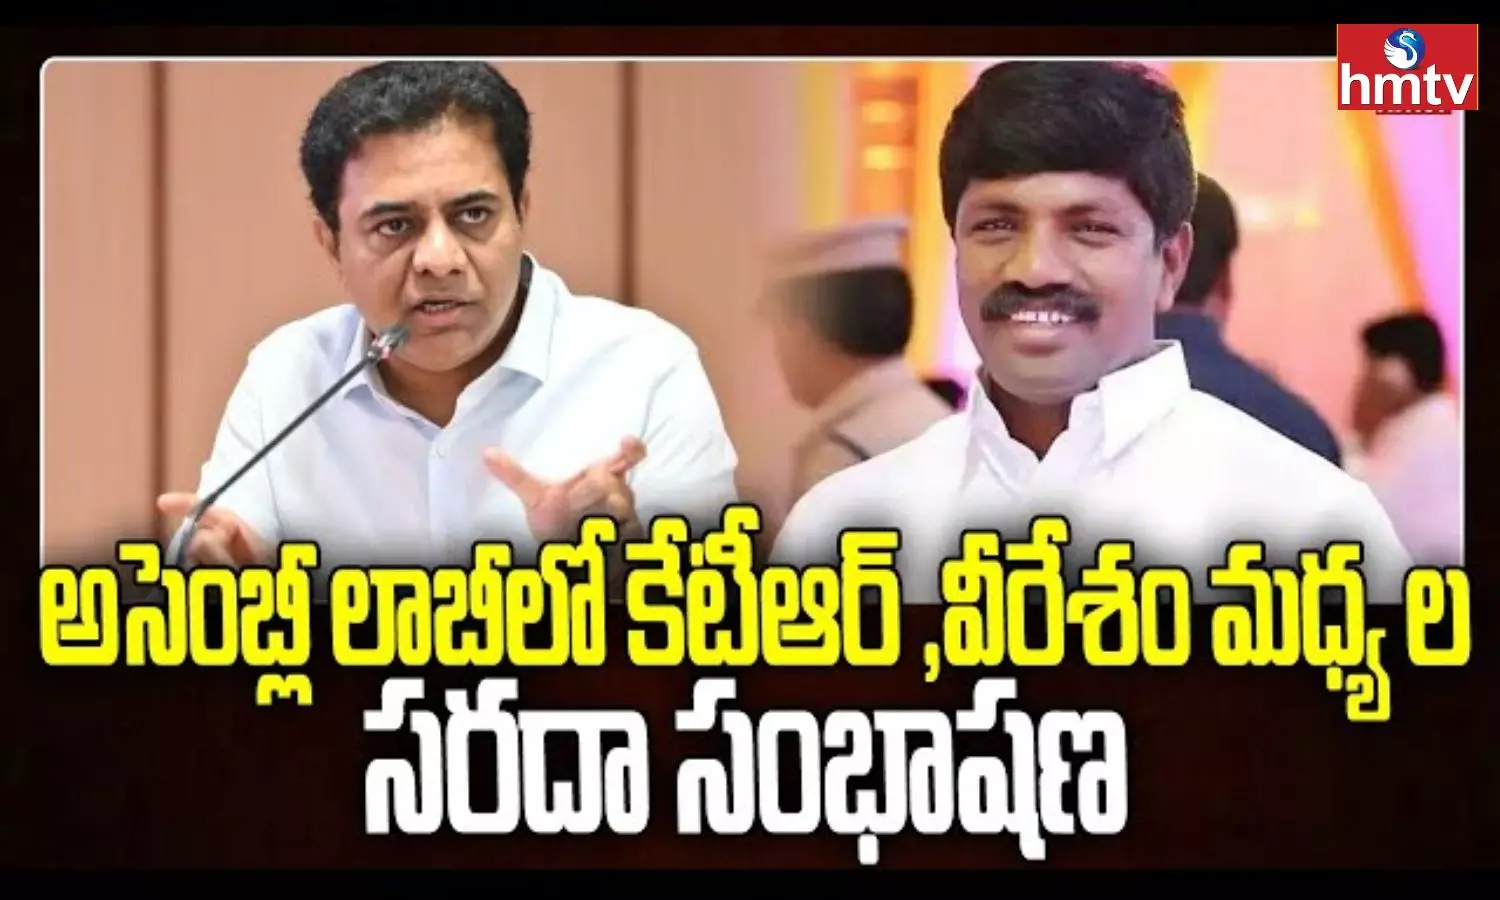 Funny conversation between KTR and Veeresham in the assembly lobby